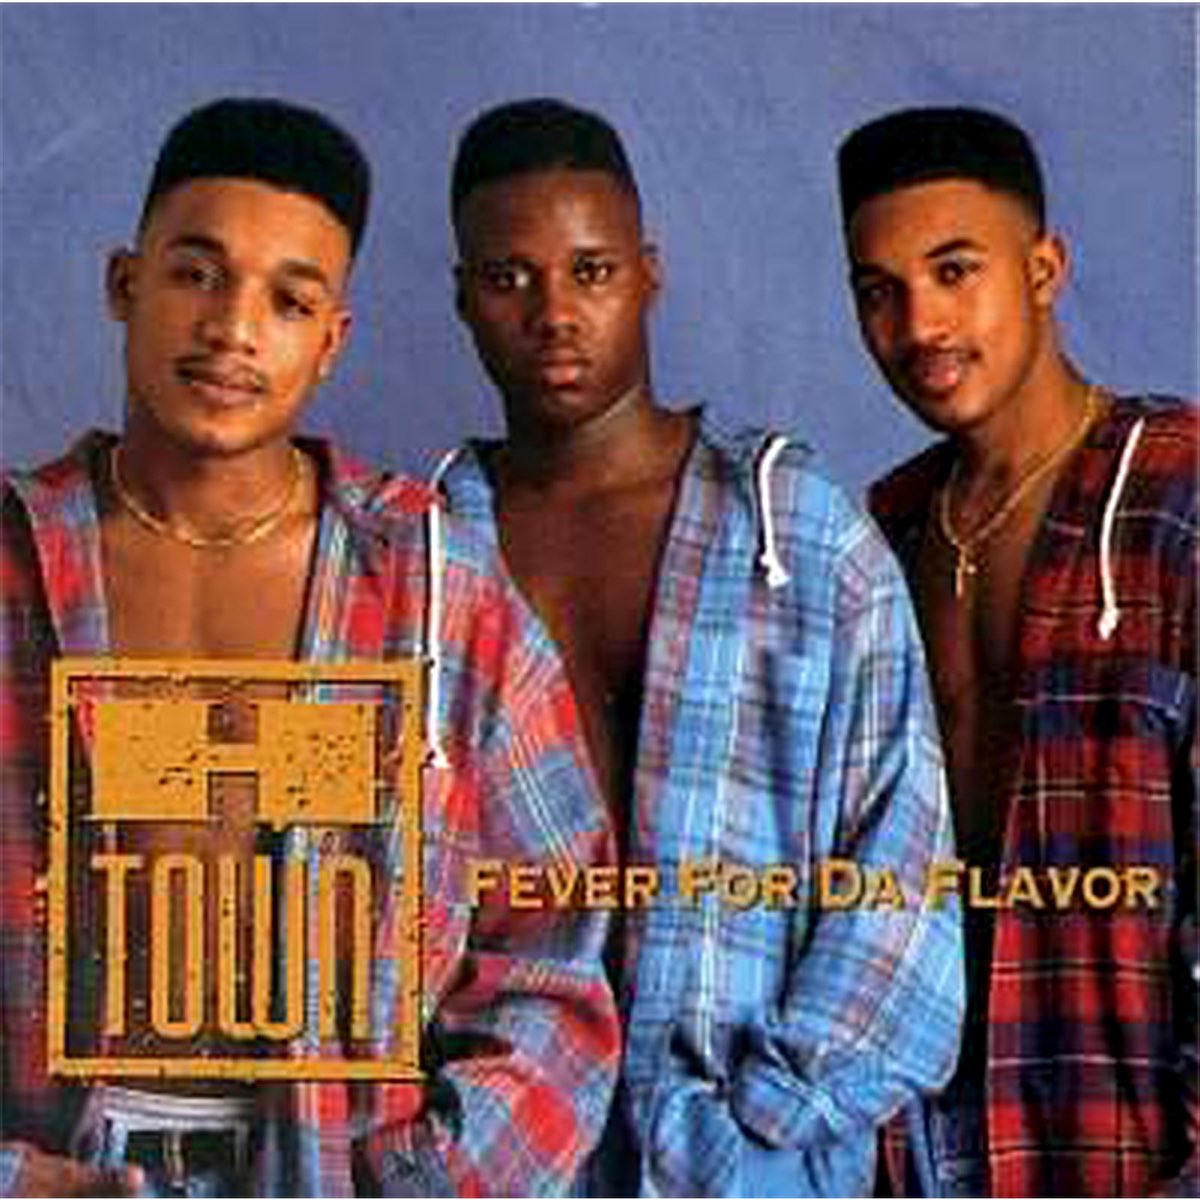 Listen to Fever for da Flavor by H-Town on Apple Music. 